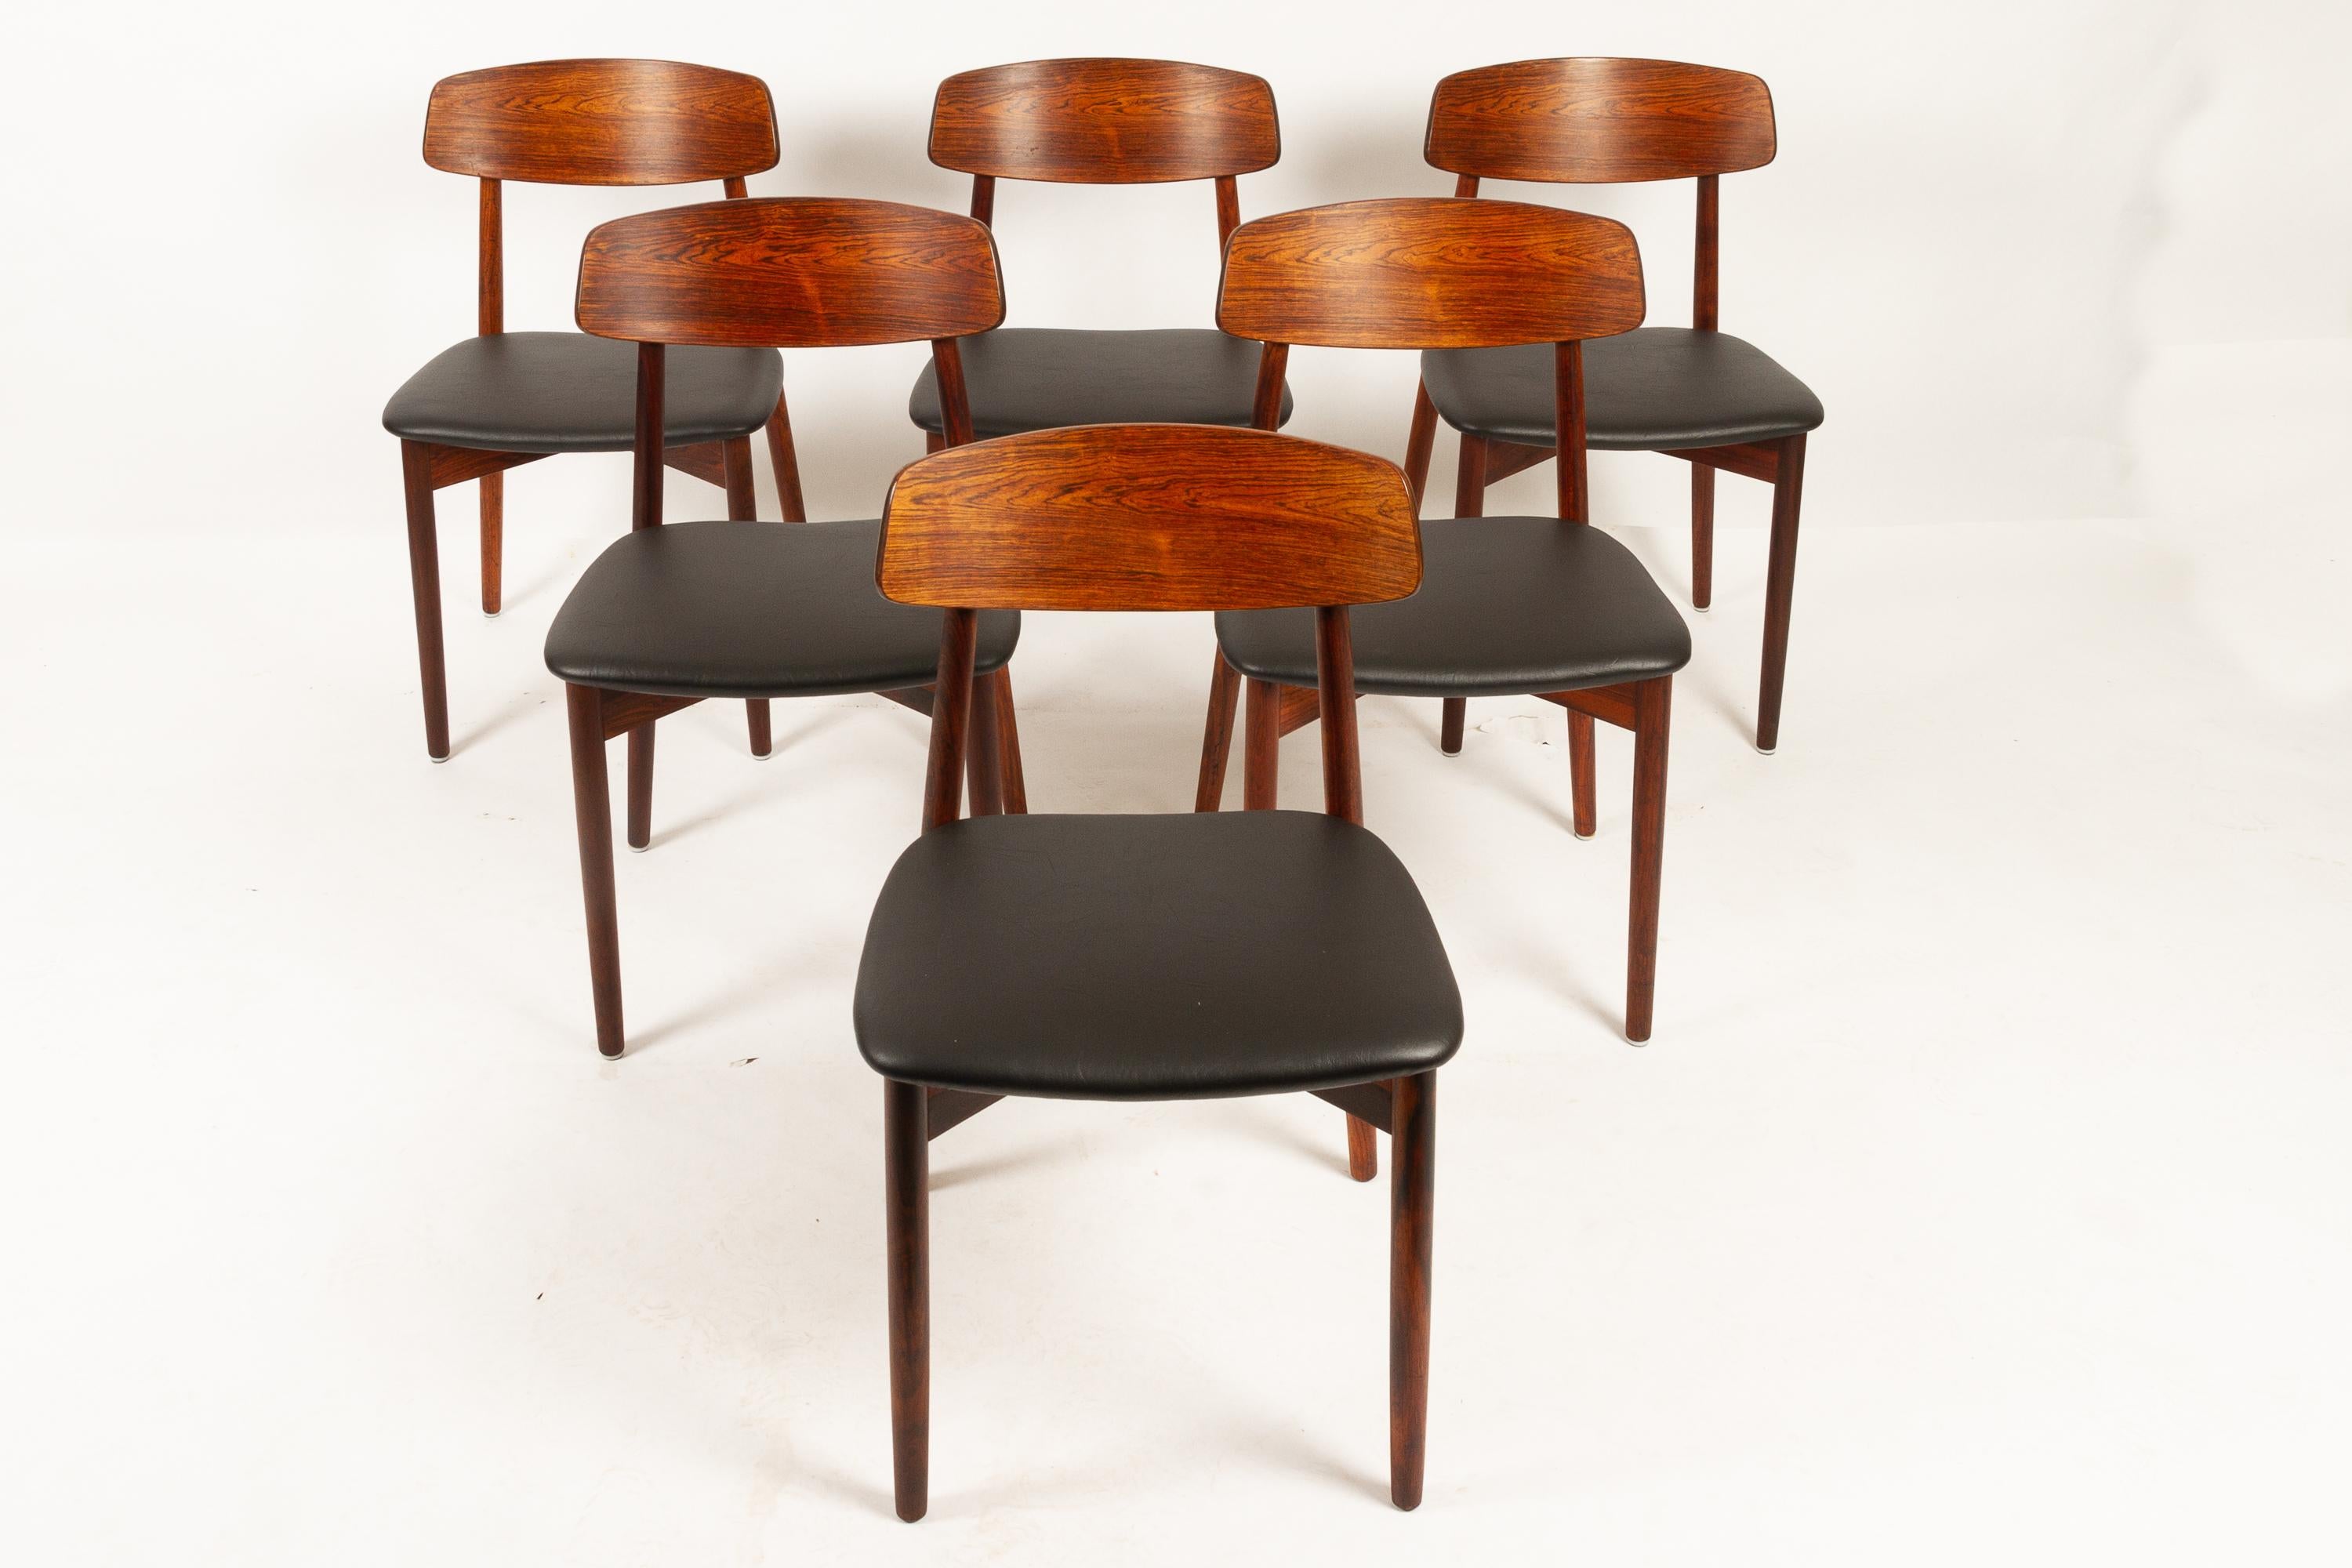 Vintage Danish rosewood dining chairs by Harry Østergaard for Randers Møbelfabrik, 1960s. Set of 6.
Very elegant Mid-Century Modern chairs, with curved backrests in stunningly beautiful rosewood veneer. Thin round tapered legs in solid rosewood.